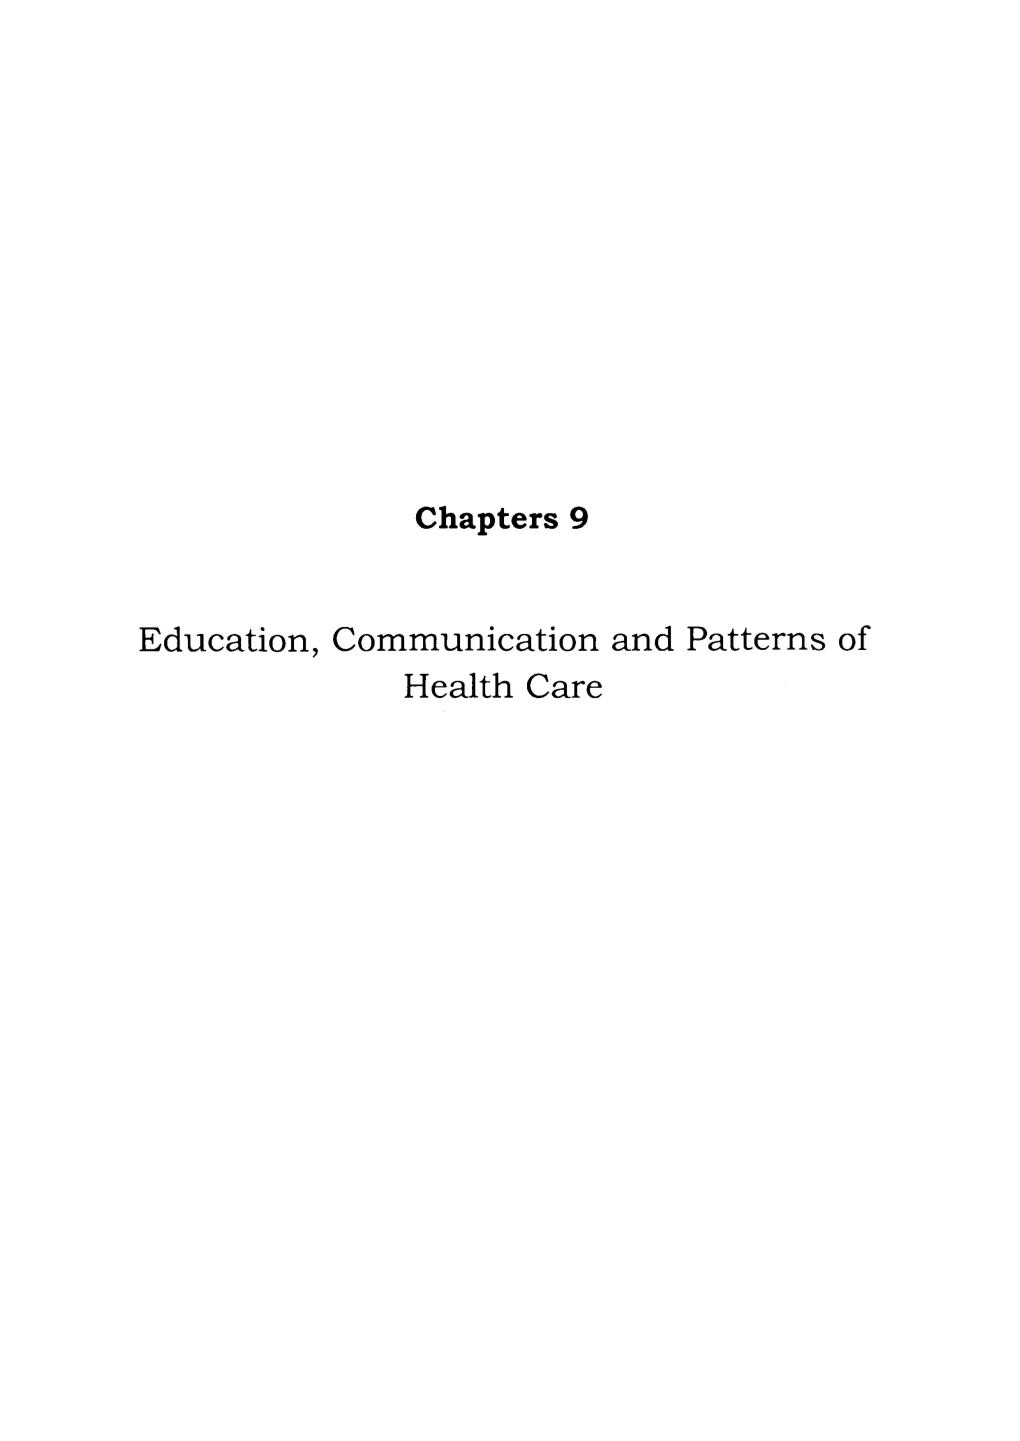 Chapters 9 Education, Communication and Patterns Of